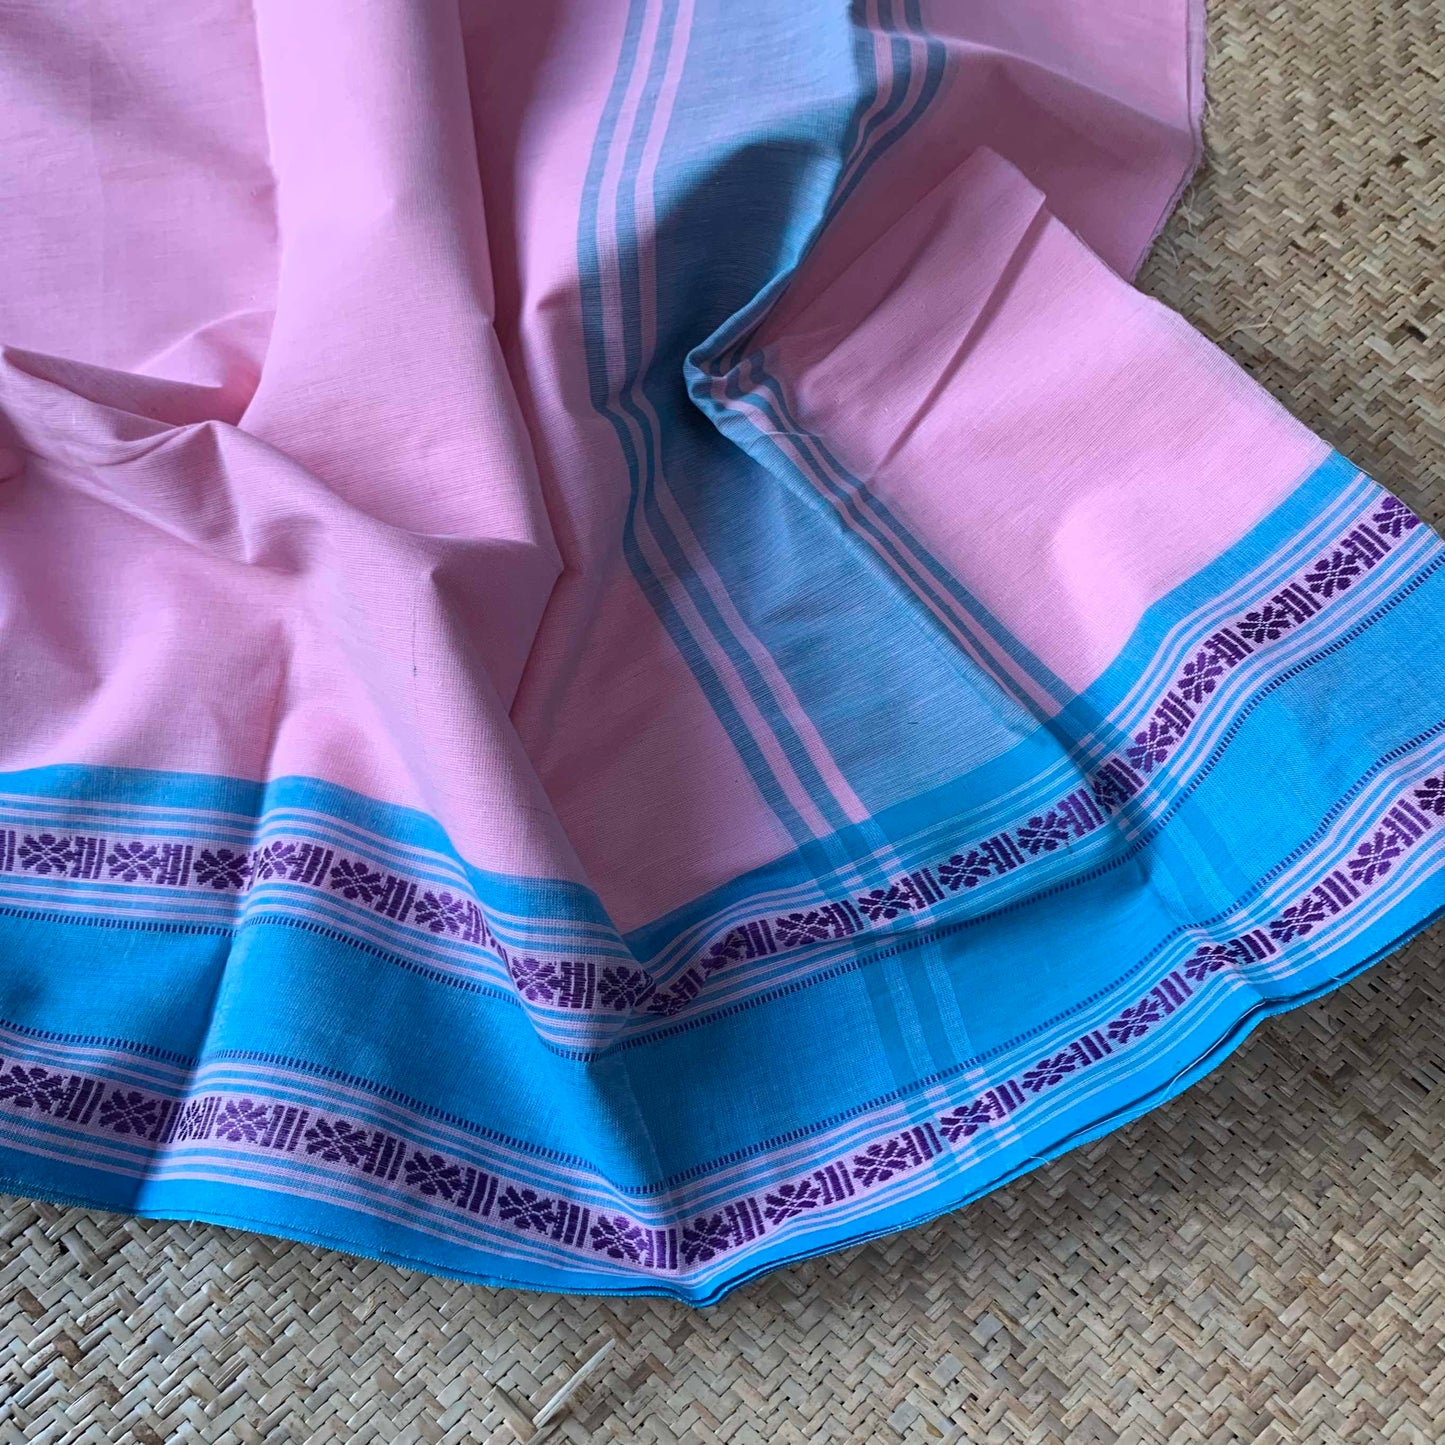 Dance practice saree, pink with blue with